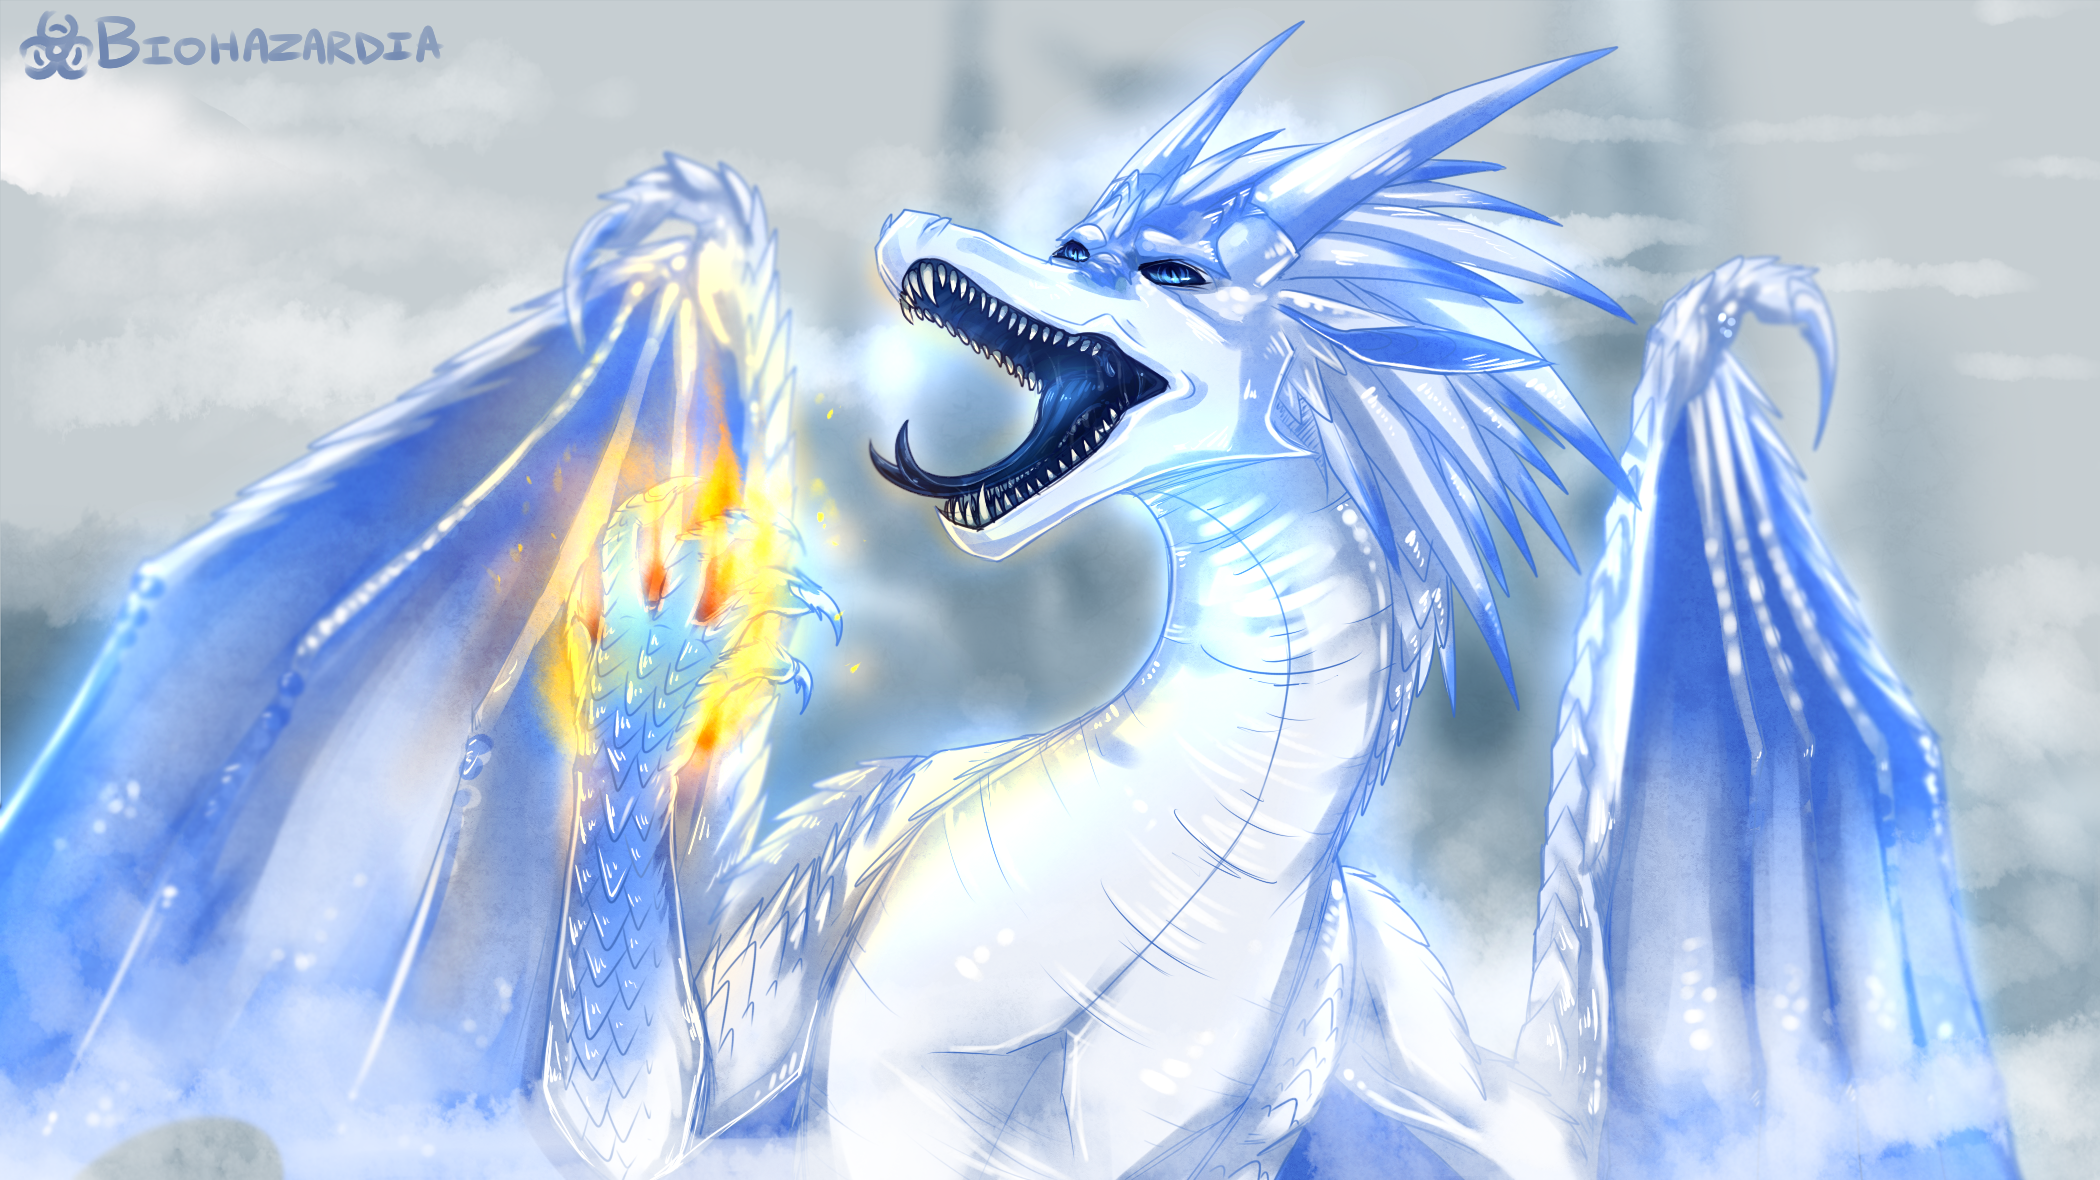 Prince Arctic the IceWing from Wings of Fire! It's a scene from the Runaways Winglet where he uses his animus magi. Wings of fire, Wings of fire dragons, Fire art